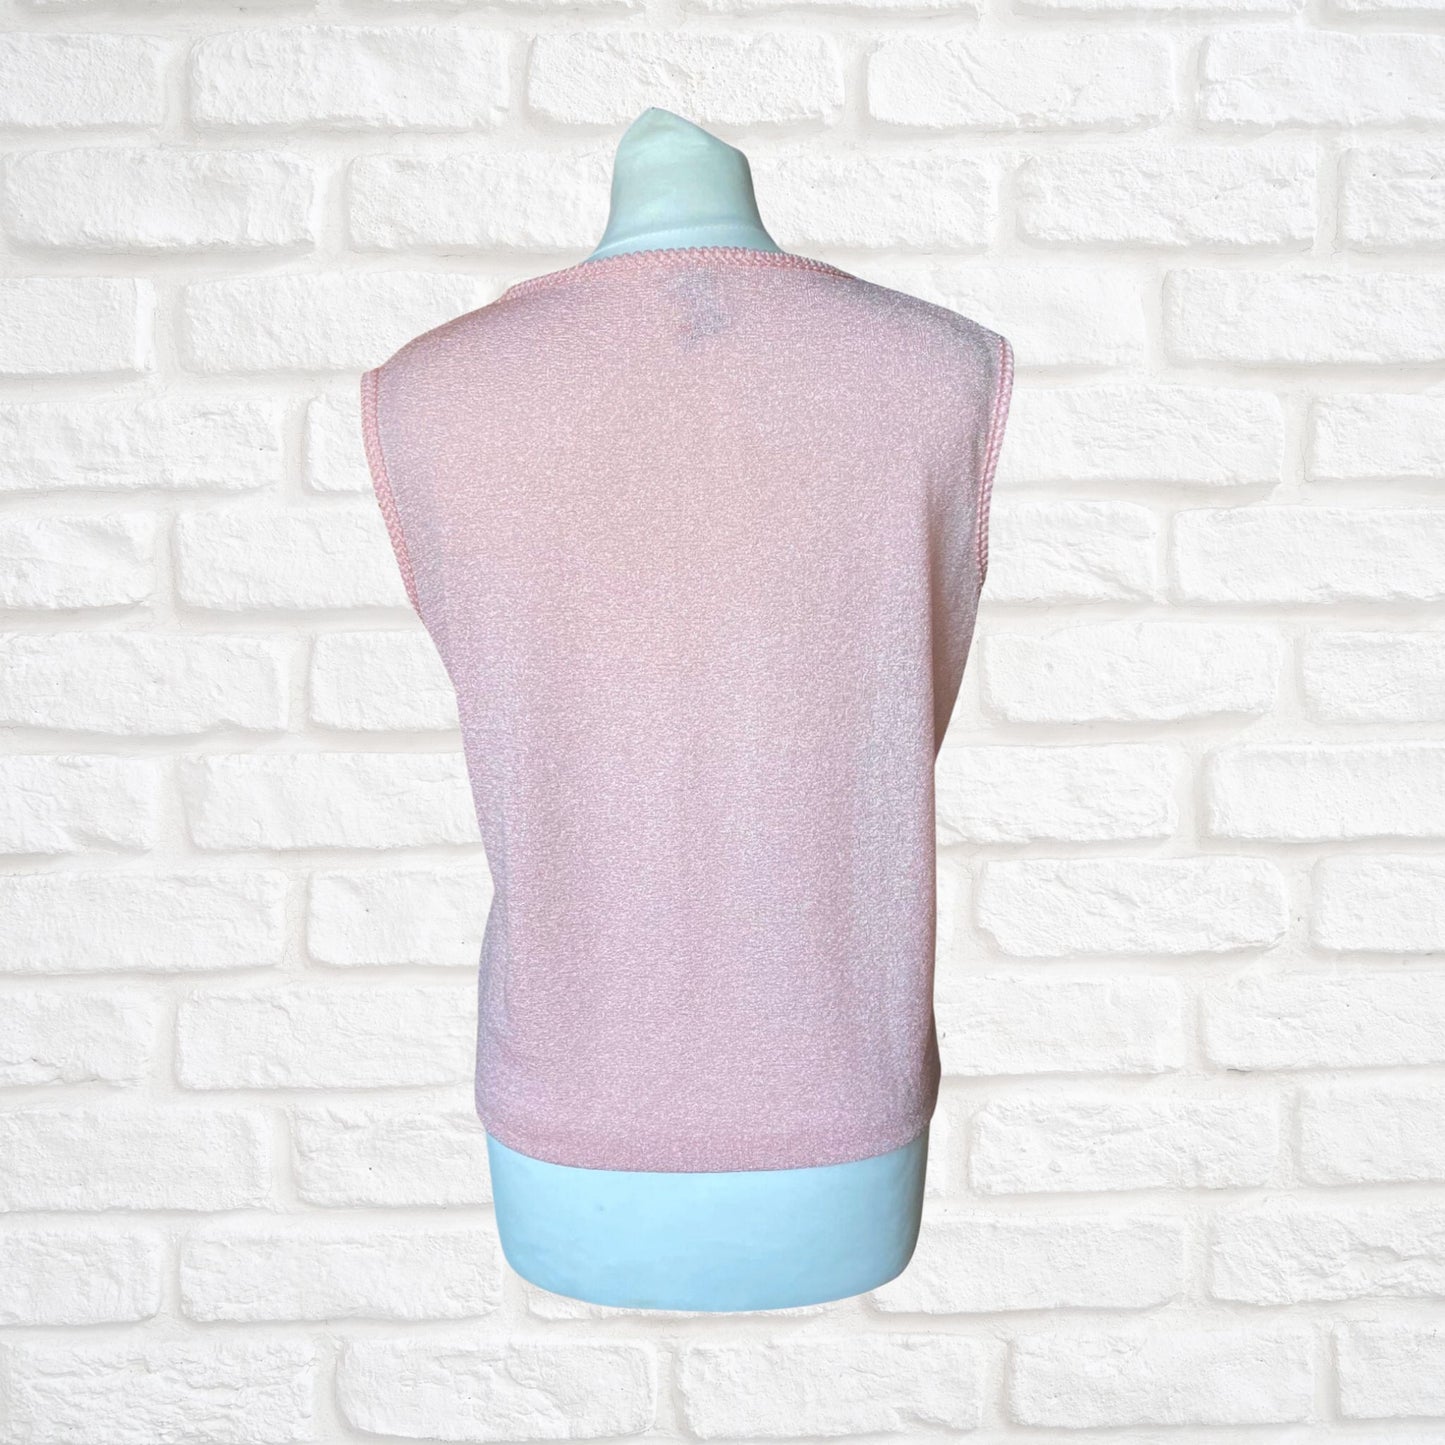 60s sleeveless pink mod top. Vintage St. Michael. Approx UK size 12-14